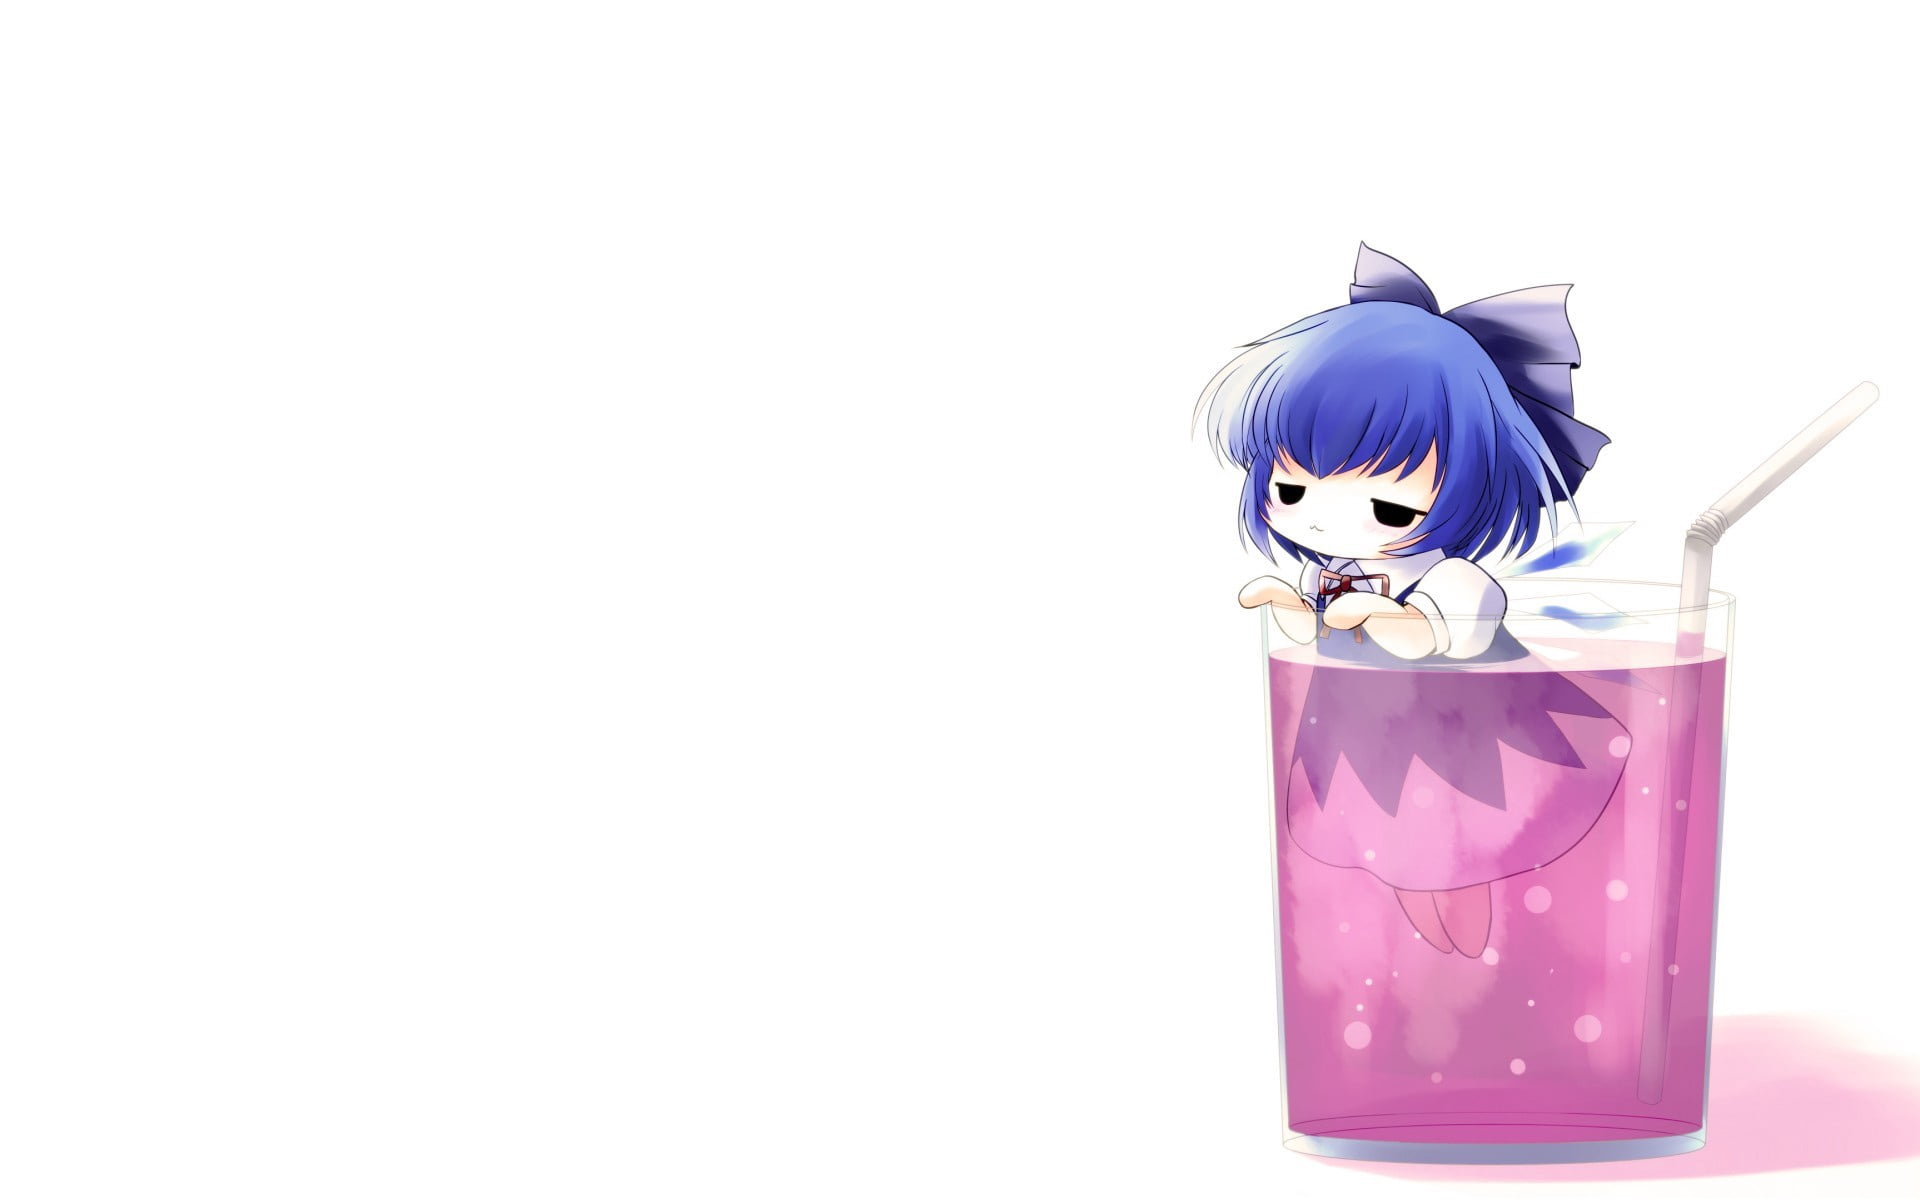 Touhou Project Cirno illustration, girl, glass, tubule, backgrounds